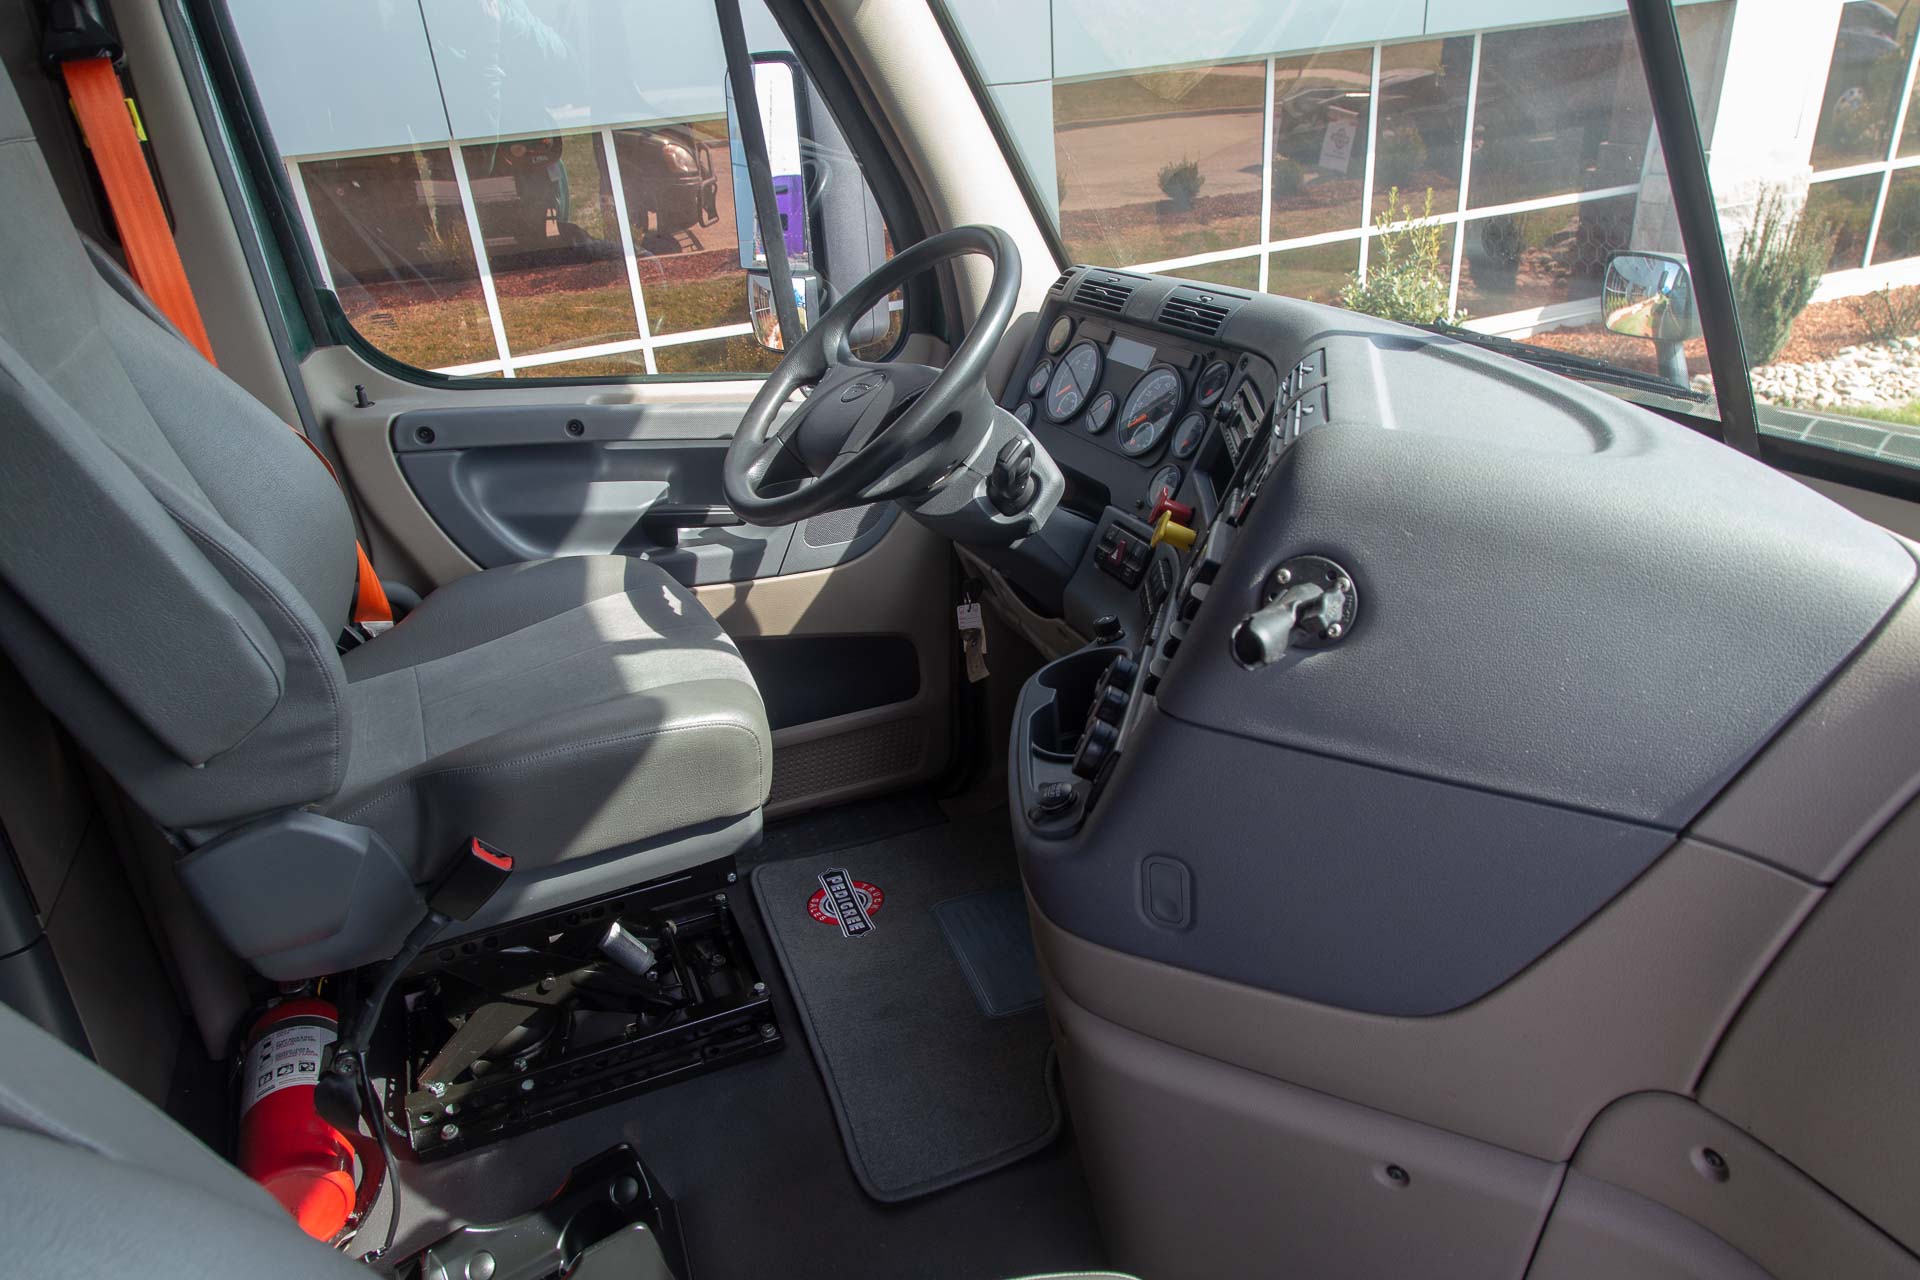 The interior cabin of a Freightliner semi-truck at Pedigree Truck & Trailer Sales.